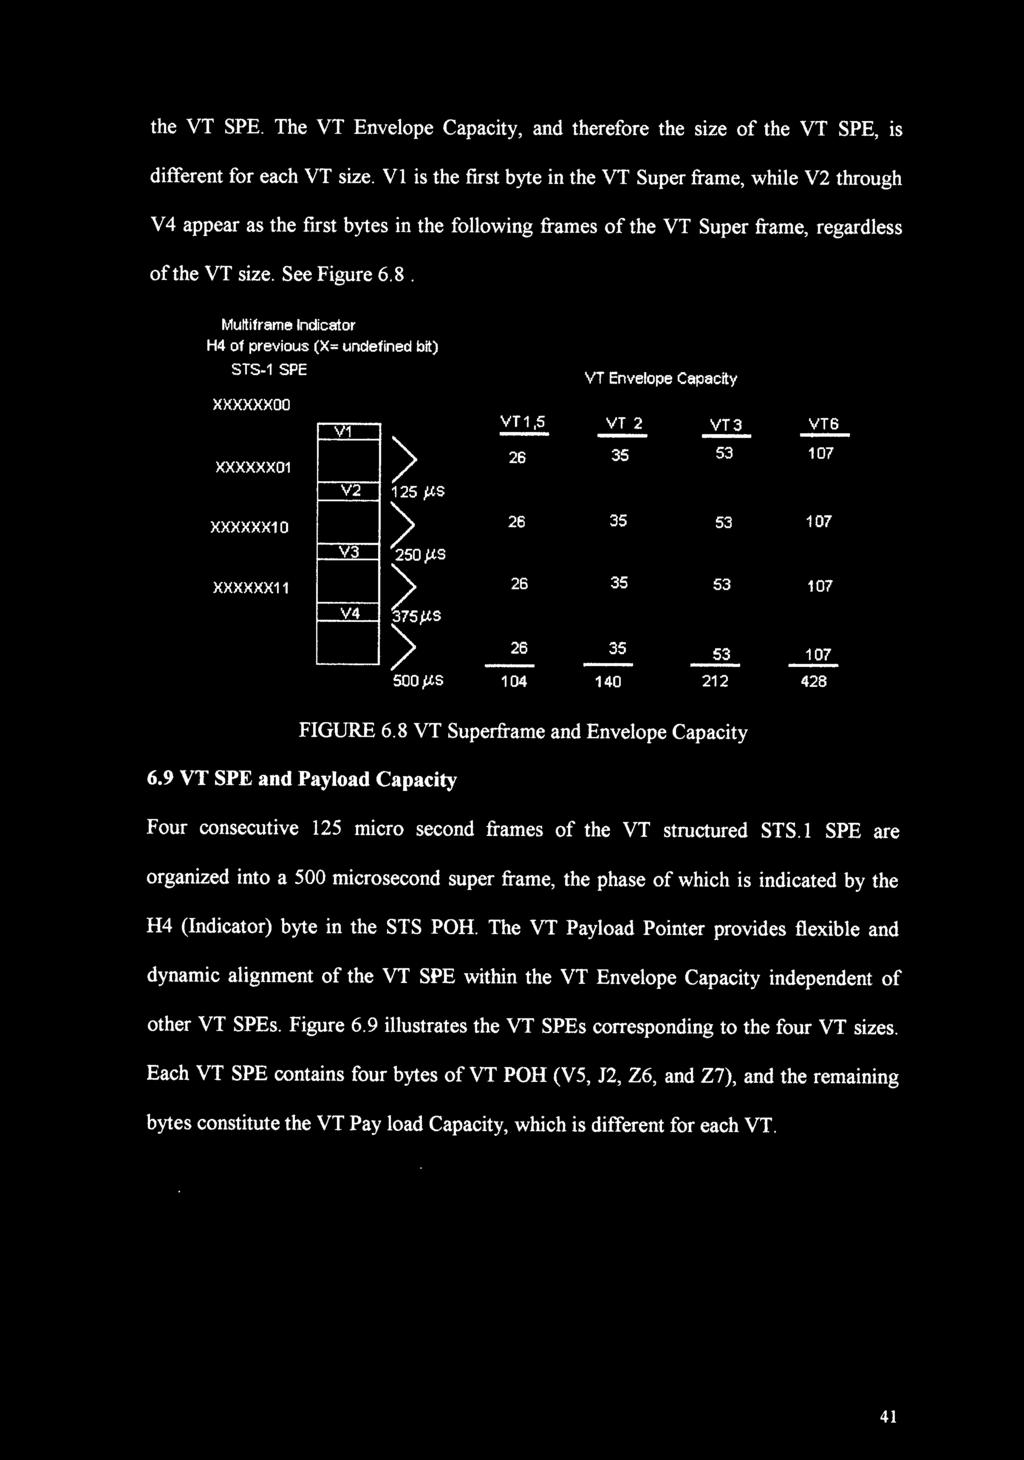 Multiframe ndicator H4 of previous (X= undefined bit) STS-1 SPE xxxxxxoo -c.,.